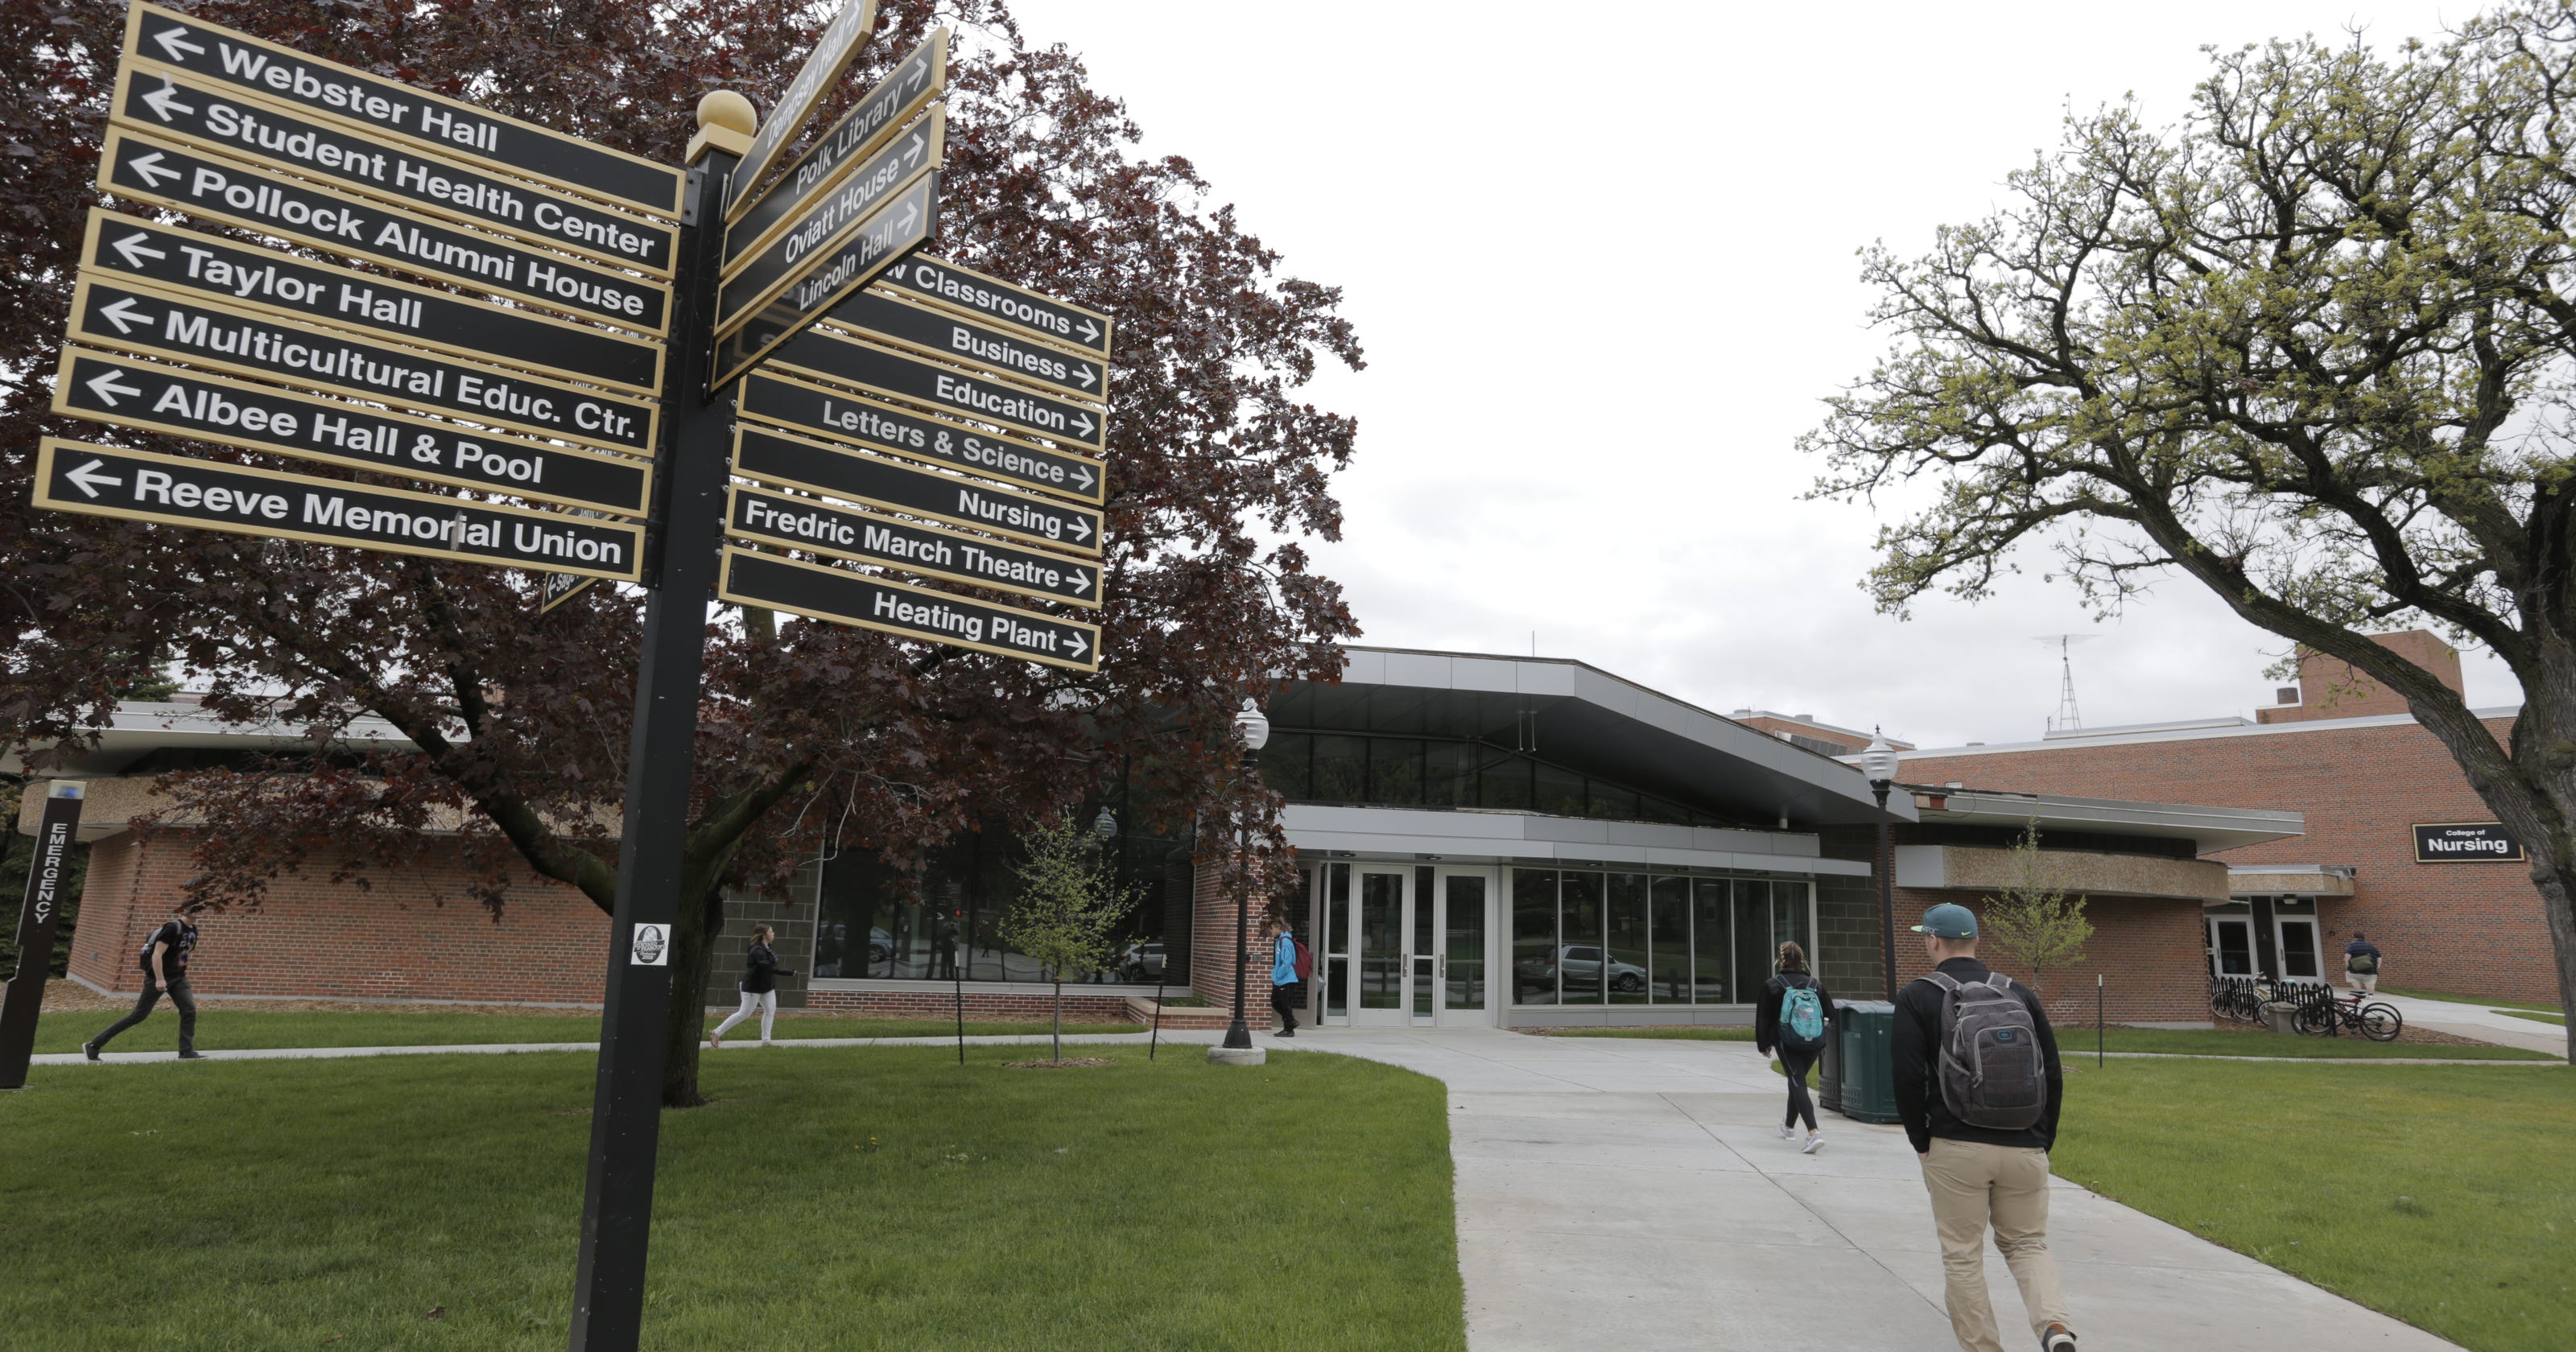 UW Oshkosh's Clow Social Science Center gets funding in state budget